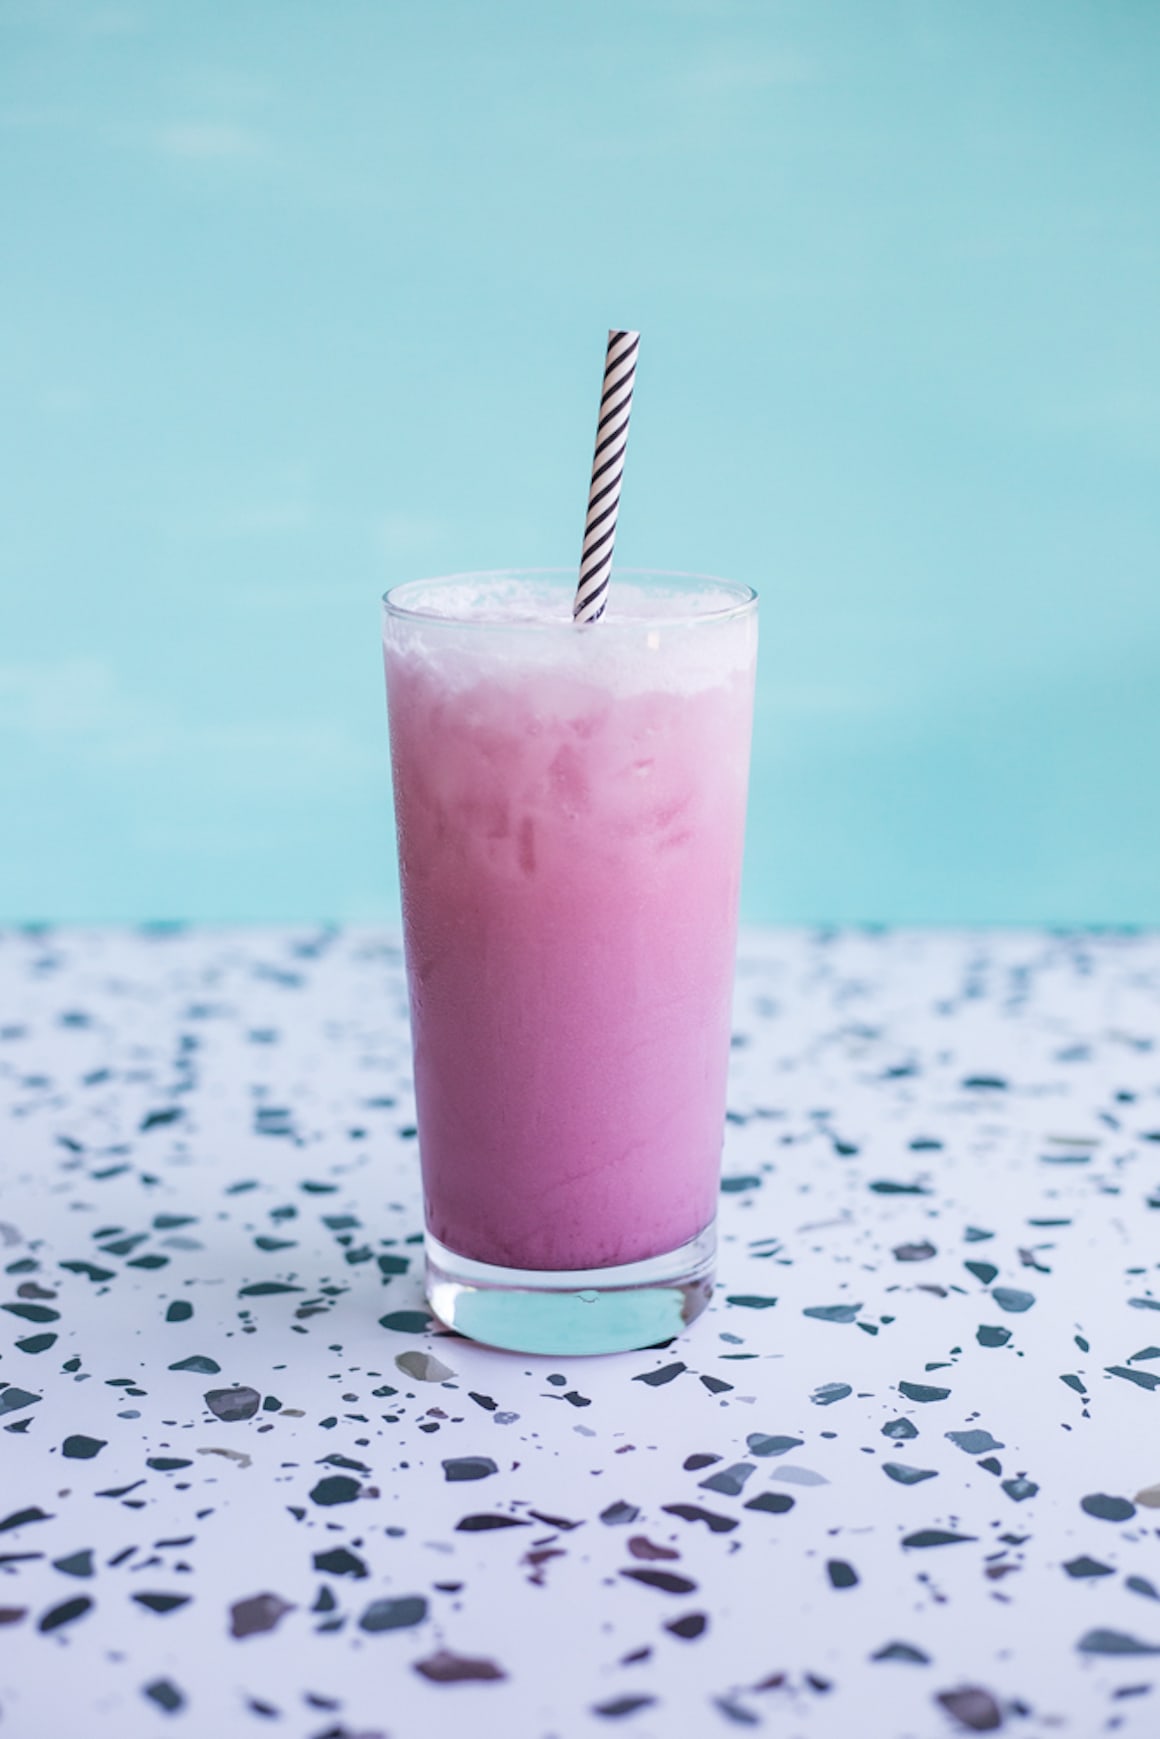 A tall glass filled with a creamy pink beverage with a striped straw, set on a terrazzo countertop